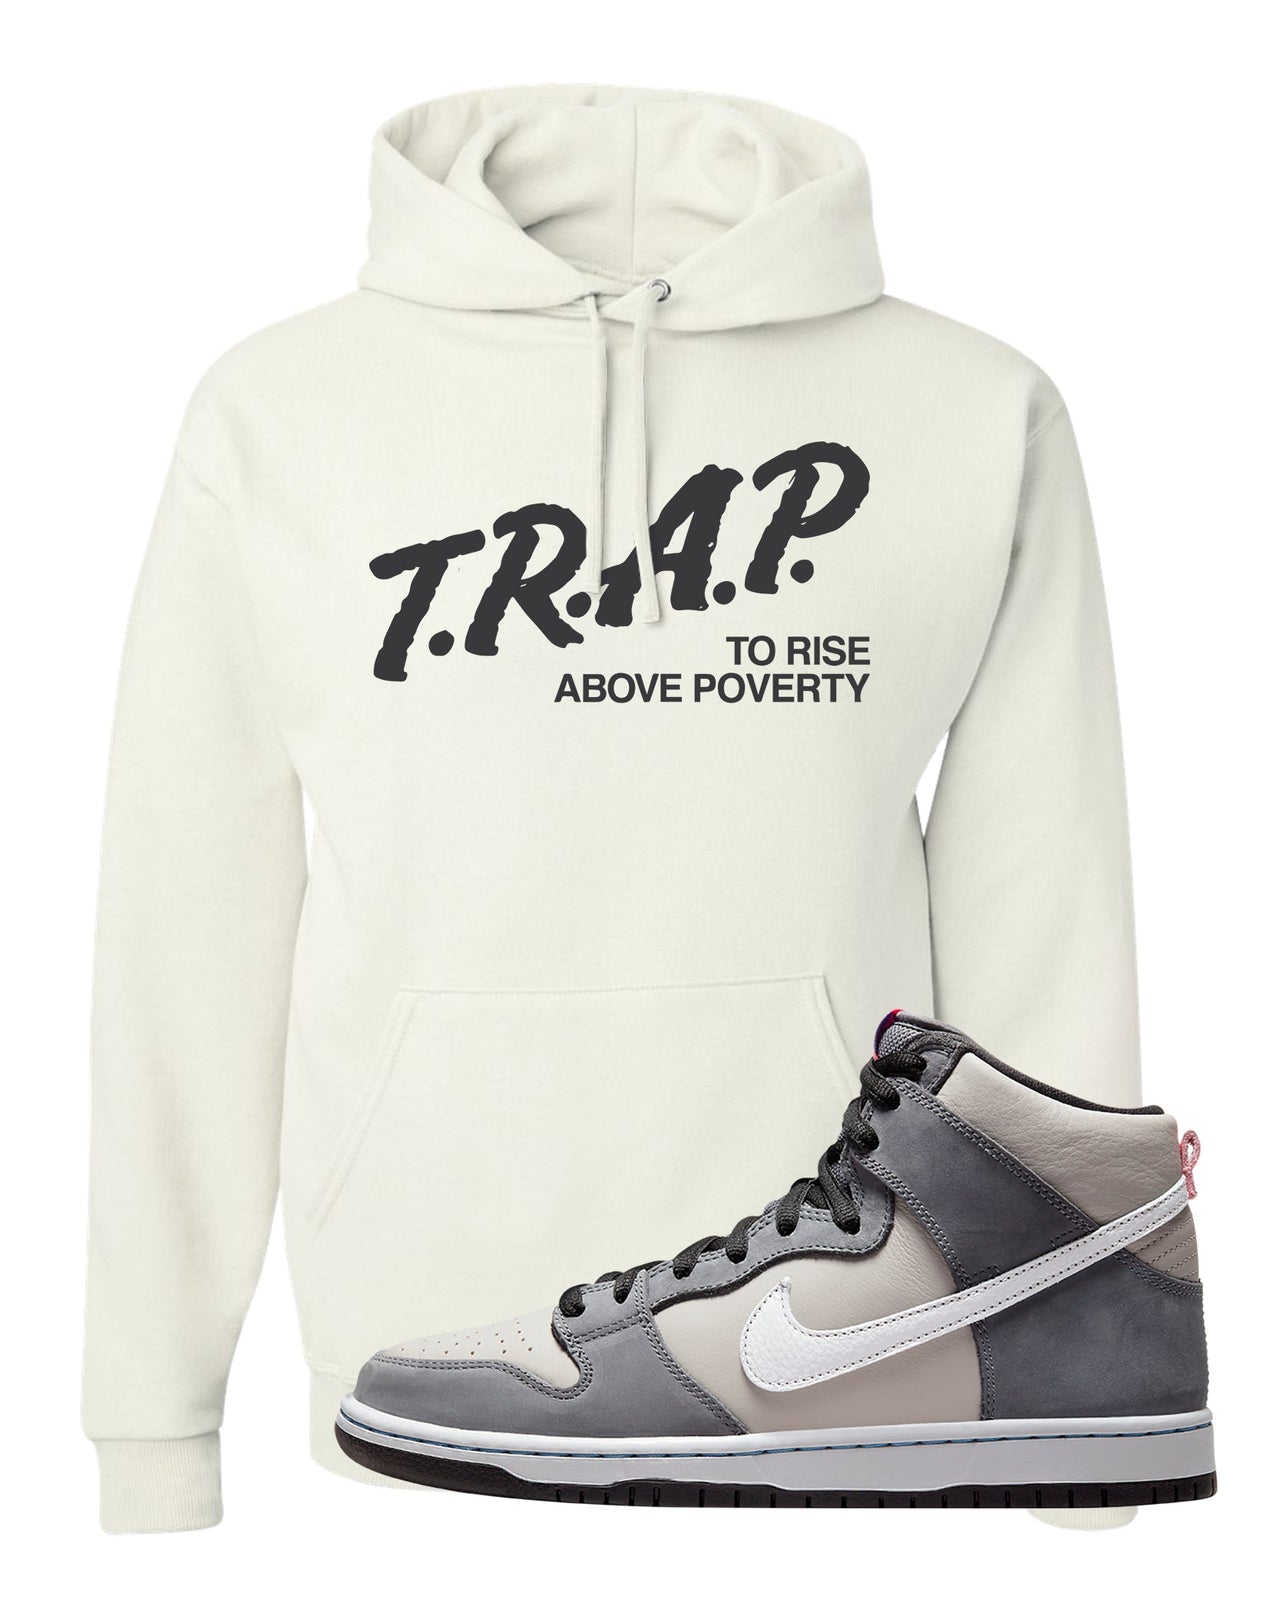 Medium Grey High Dunks Hoodie | Trap To Rise Above Poverty, White